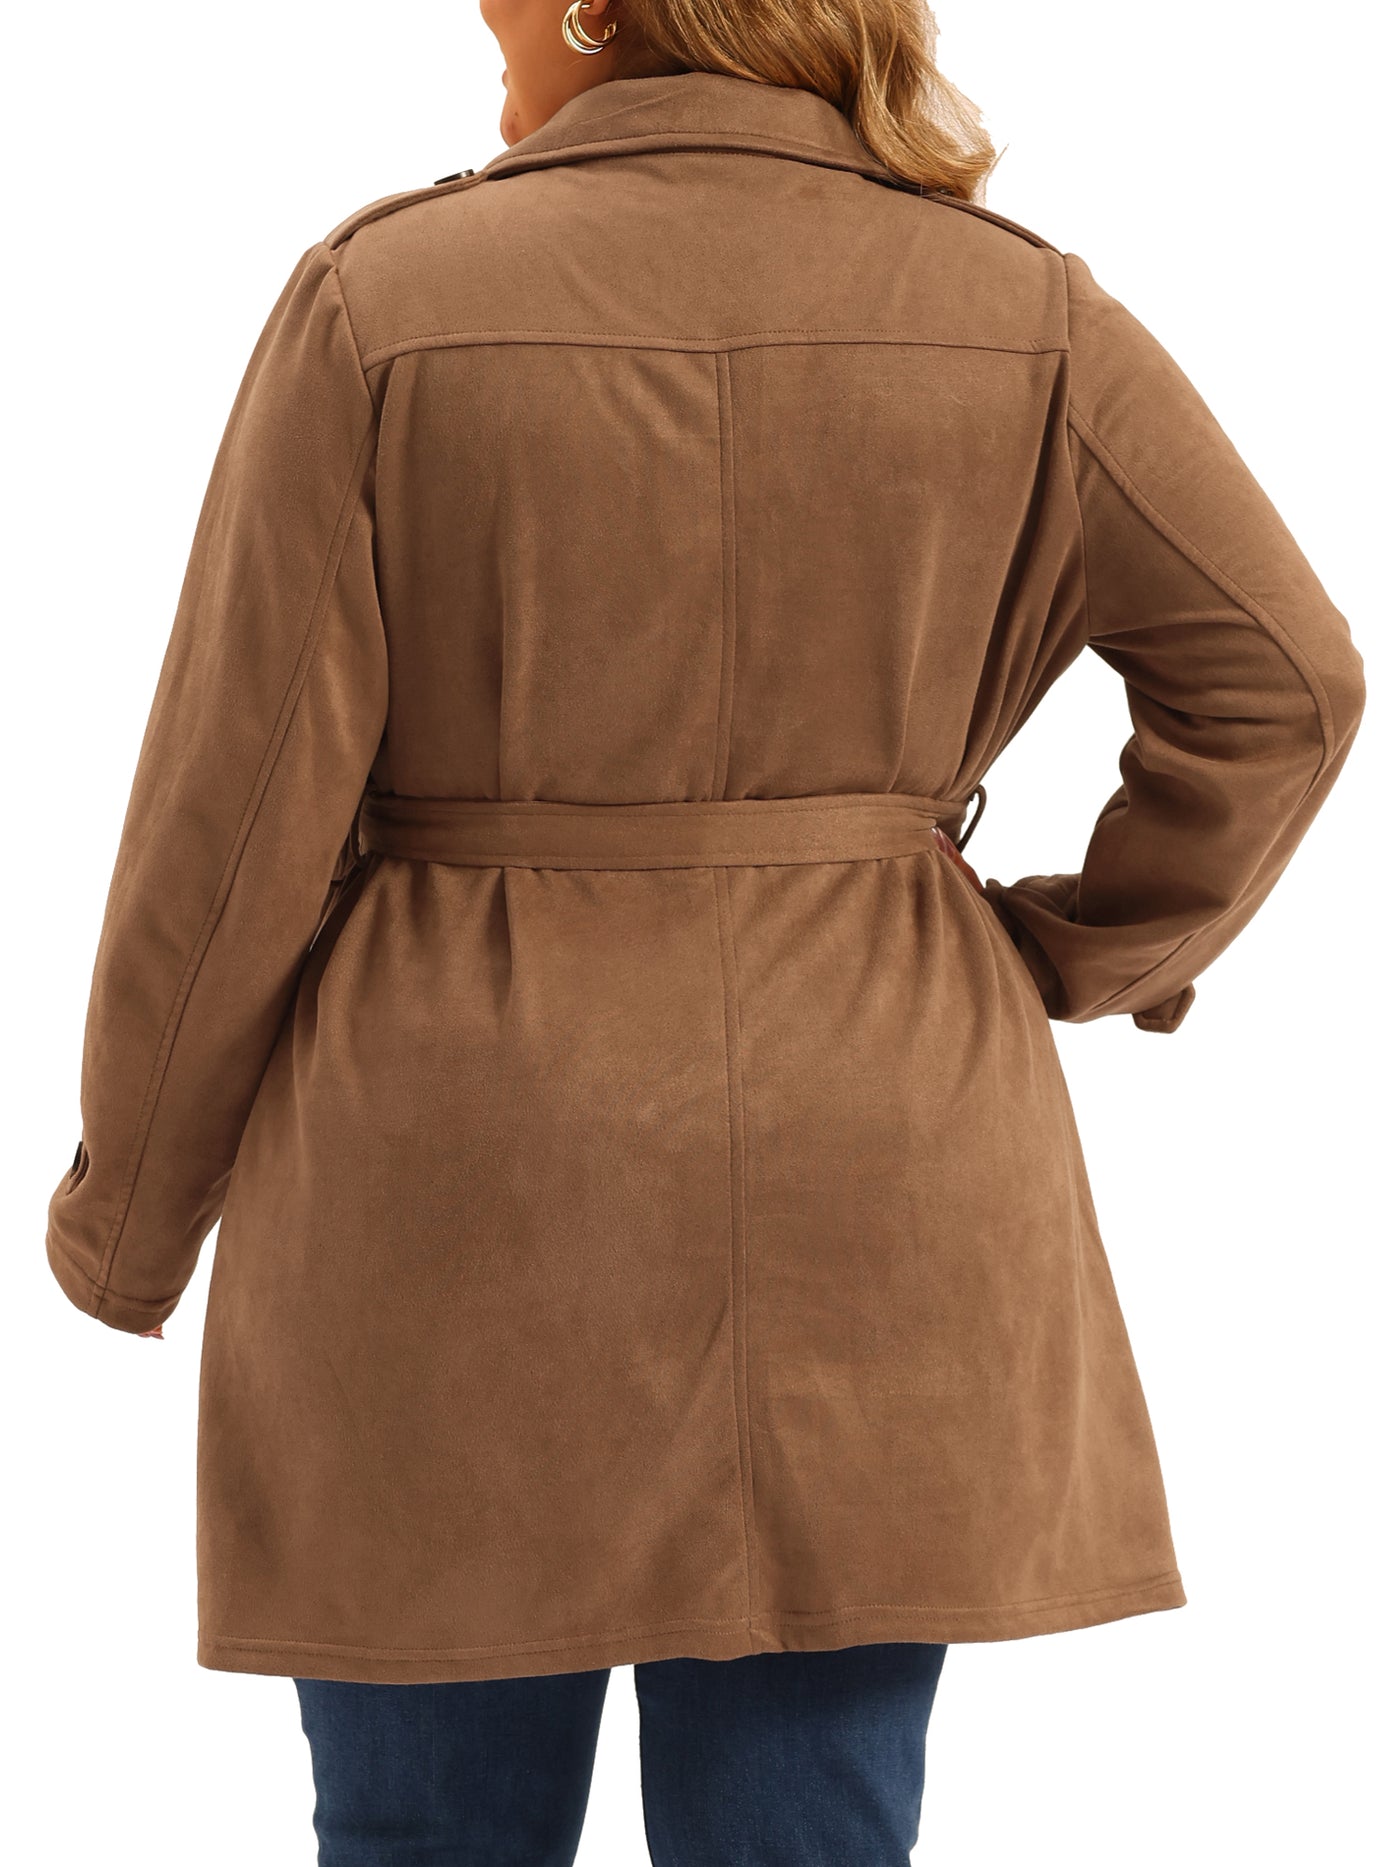 Bublédon Women's Plus Size Faux Suede Notched Lapel Double Breasted Trench Coat Jacket with Belt